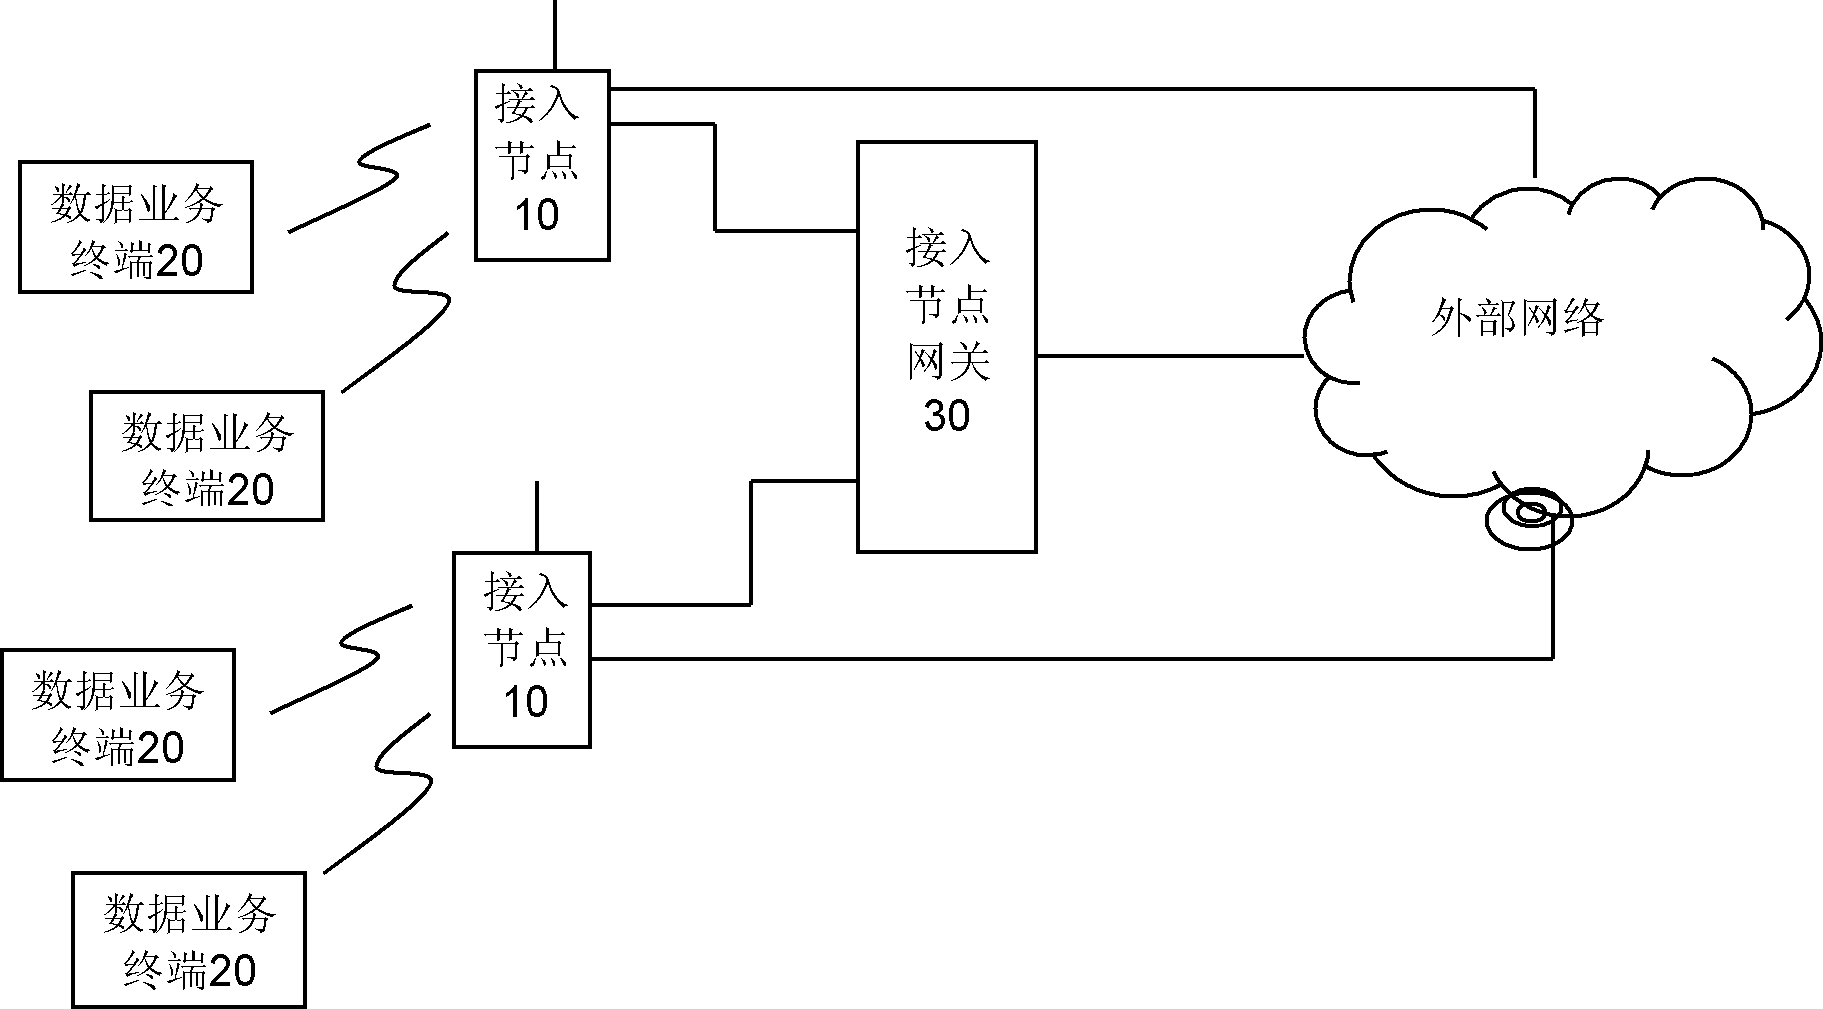 Radio data service access method, system and device